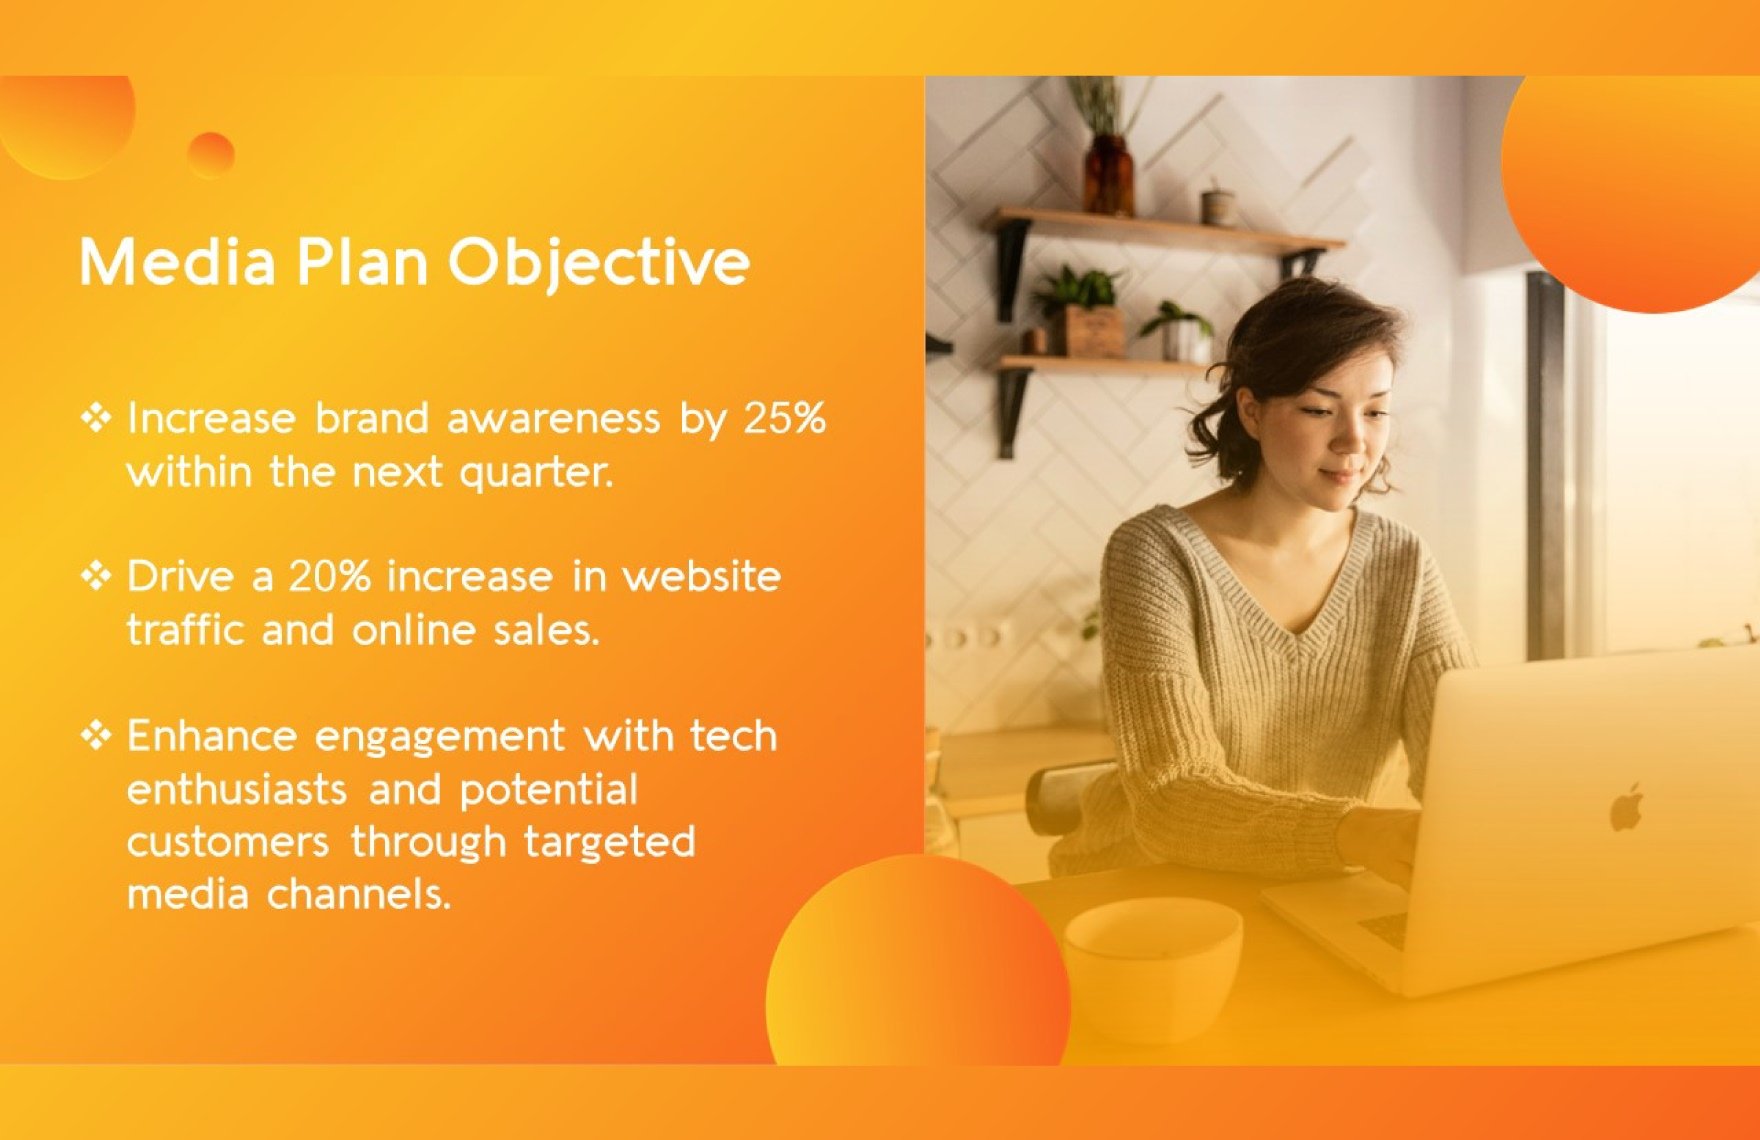 Media Planning and Buying Strategy Presentation Template